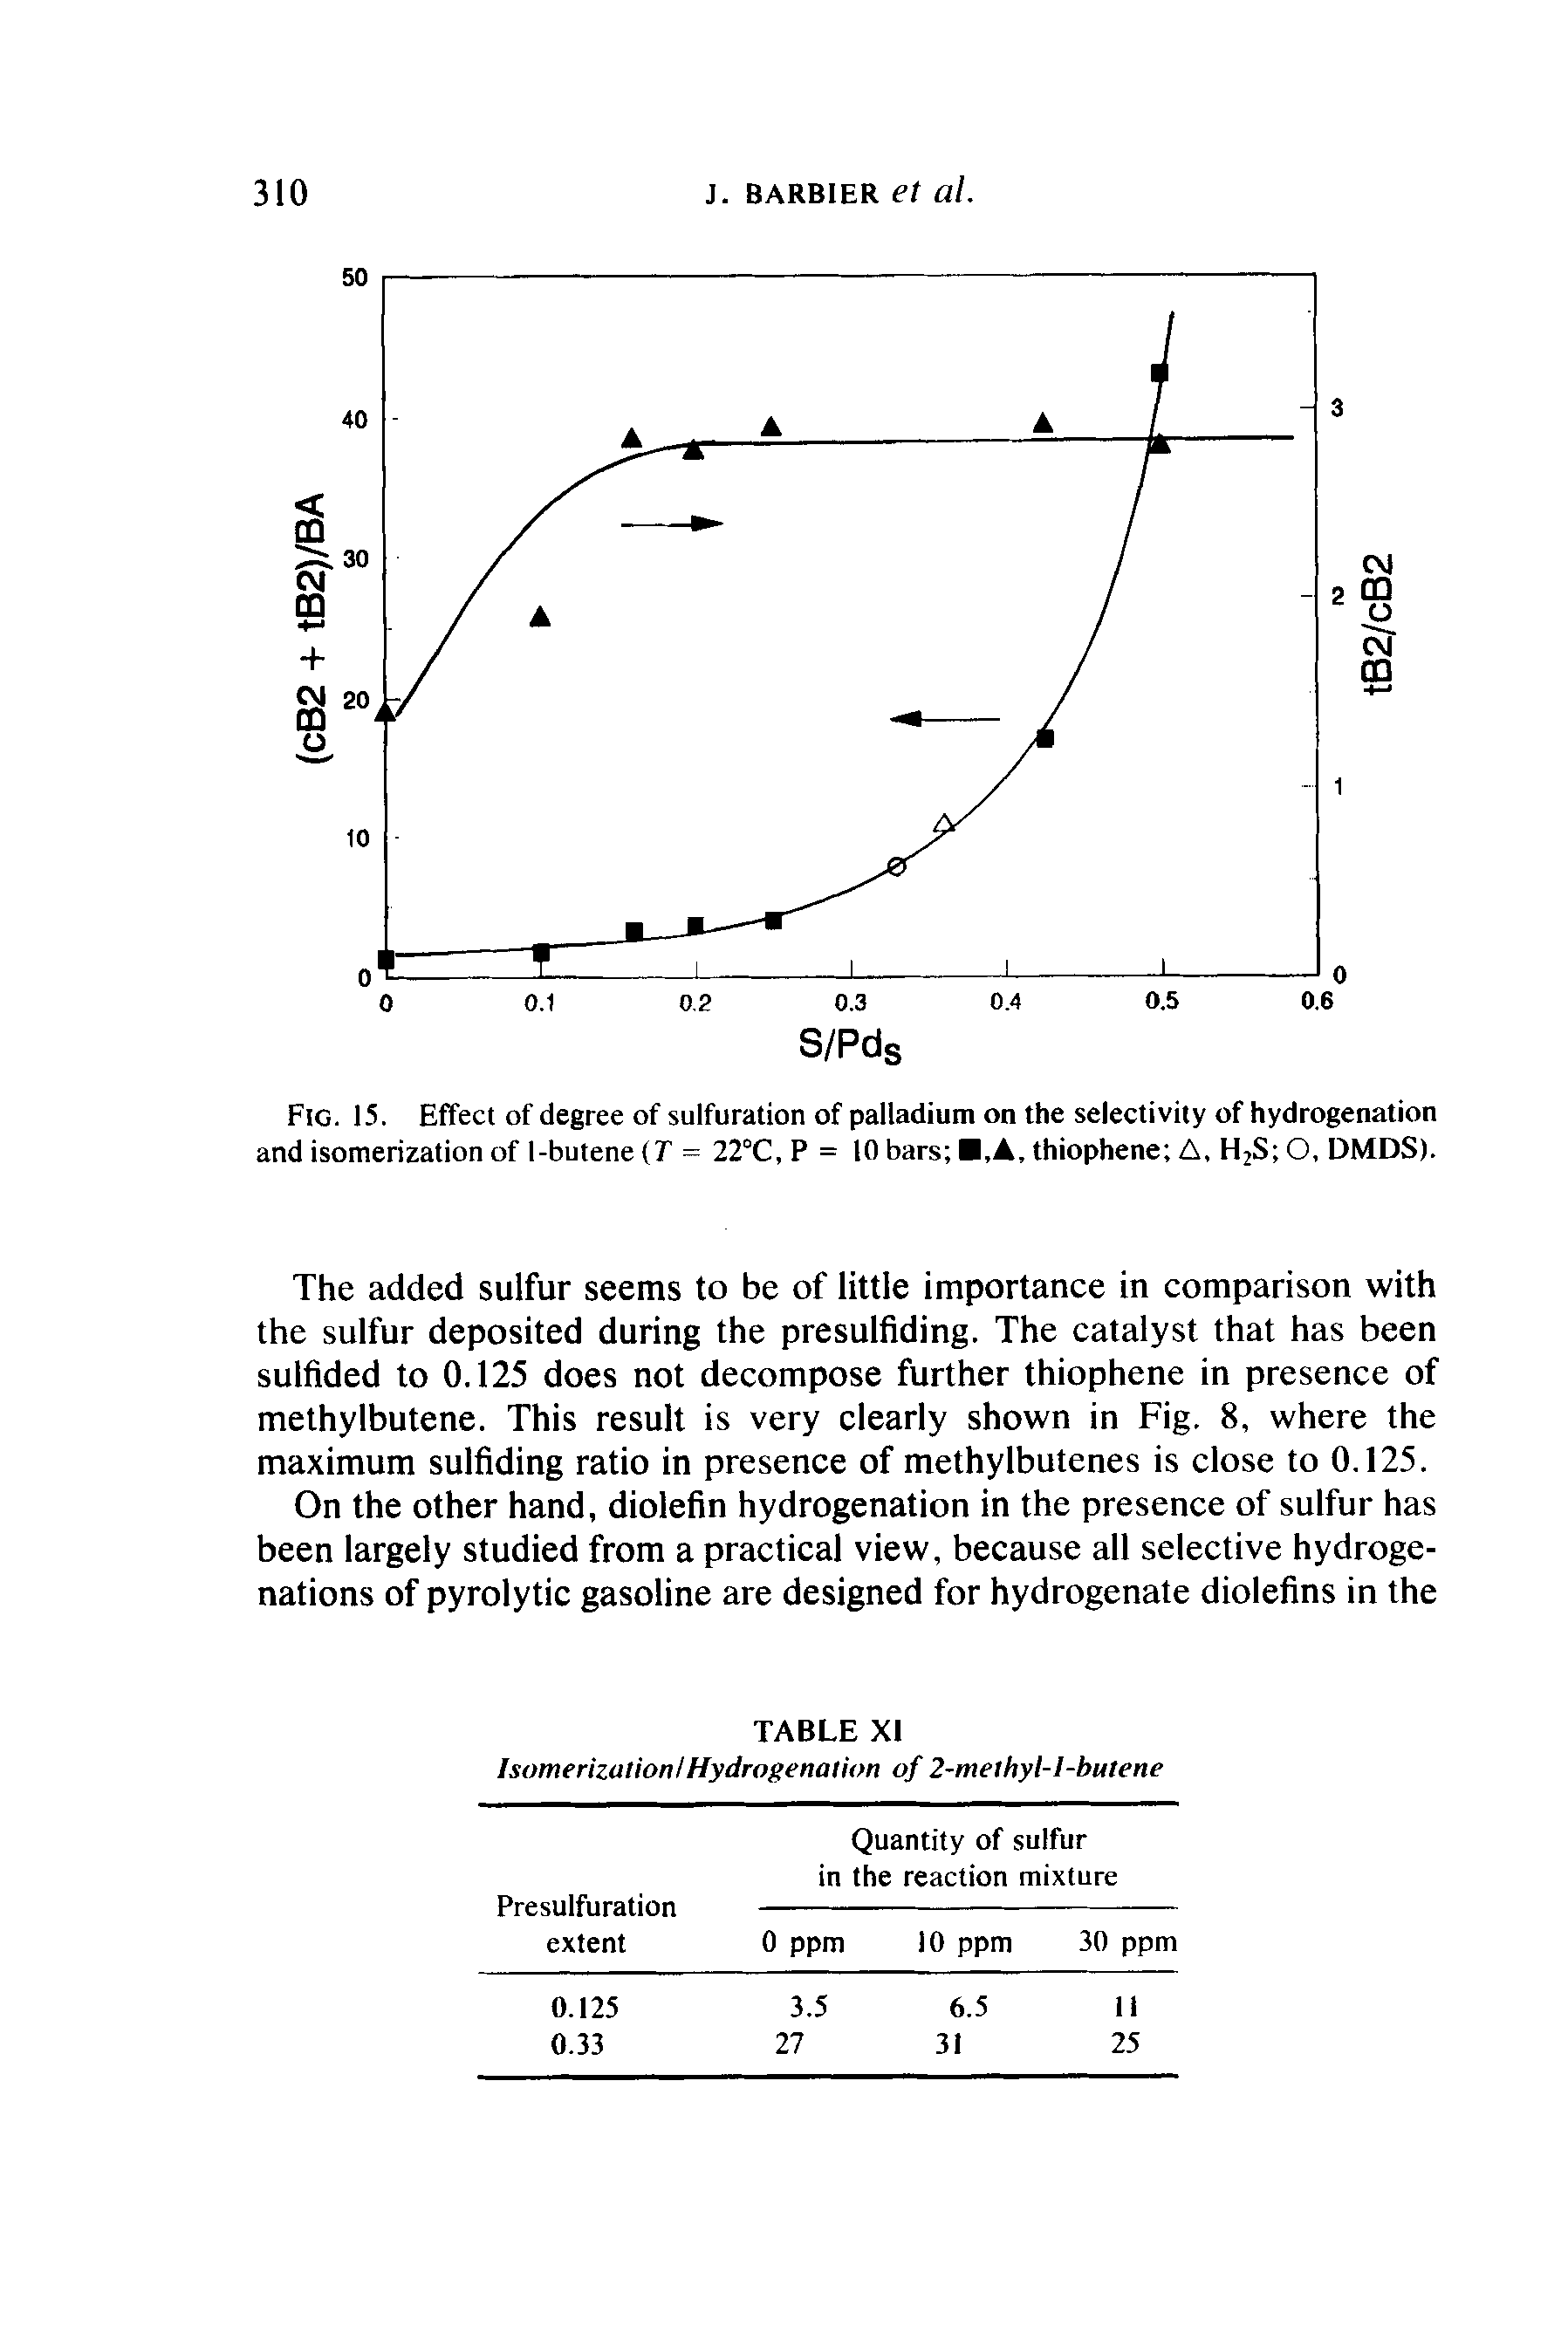 Fig. 15. Effect of degree of sulfuration of palladium on the selectivity of hydrogenation and isomerization of l-butene (T = 22°C, P = 10 bars thiophene A, H2S O, DMDS).